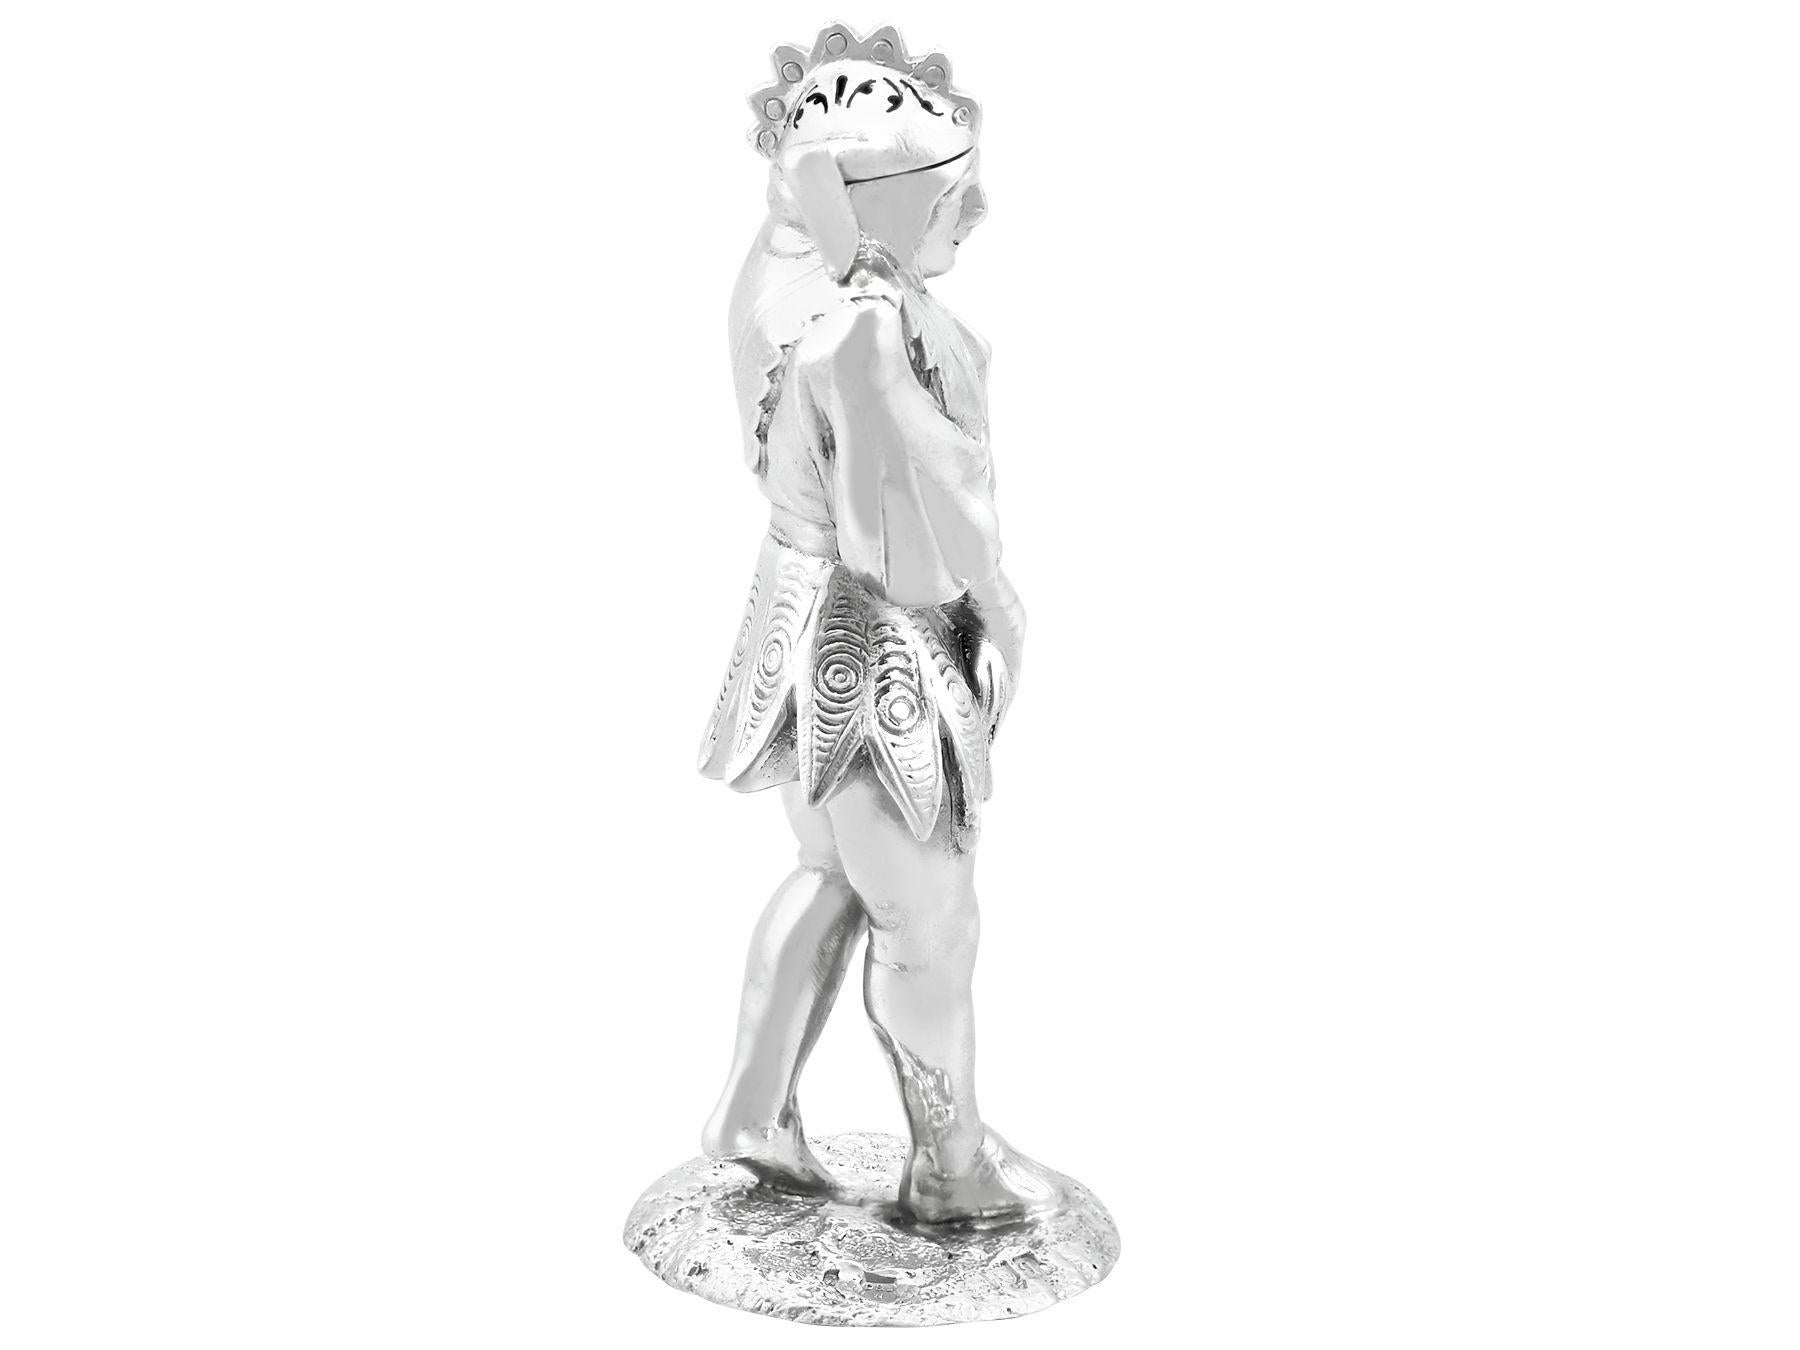 An exceptional, fine and impressive antique George V English sterling silver pepper modelled in the form of a jester; an addition to our novelty silverware collection

This exceptional and rare antique George V cast sterling silver pepperette has